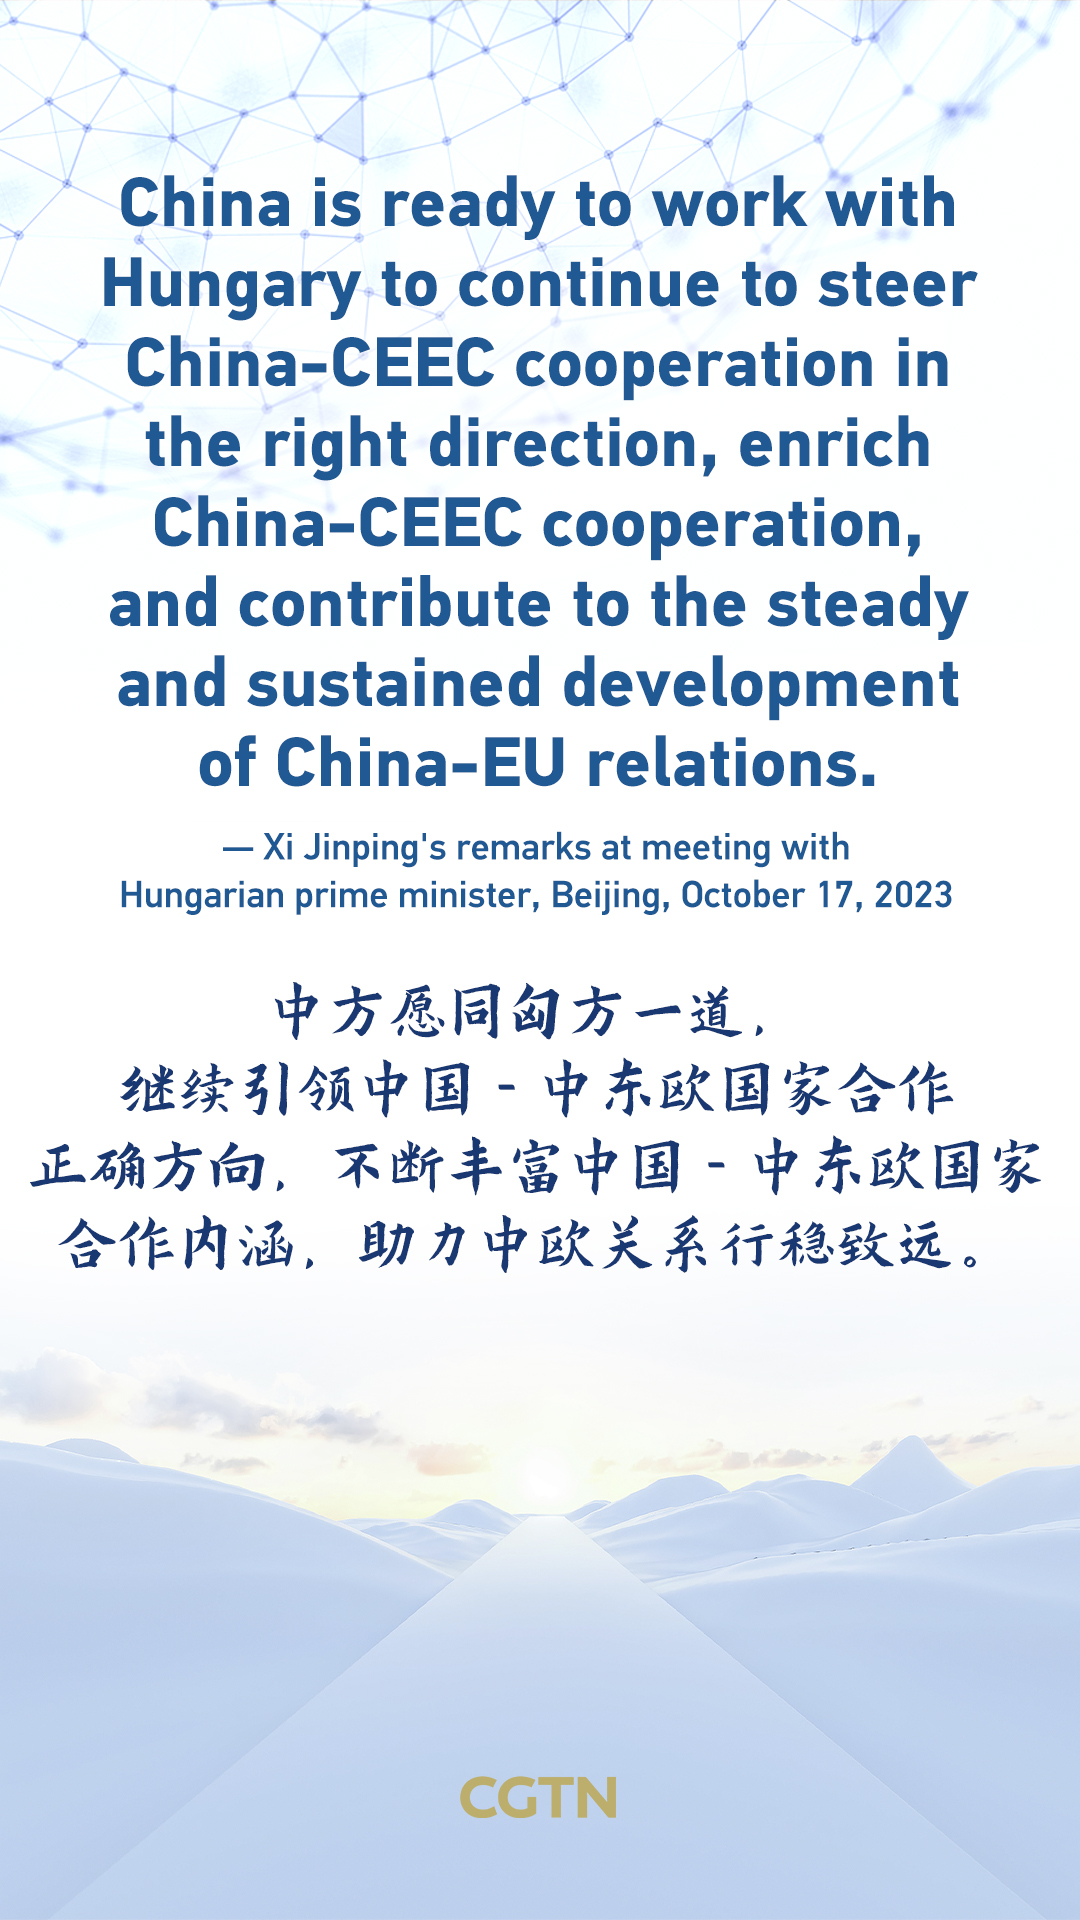 Key quotes from Xi Jinping on China-Europe relations